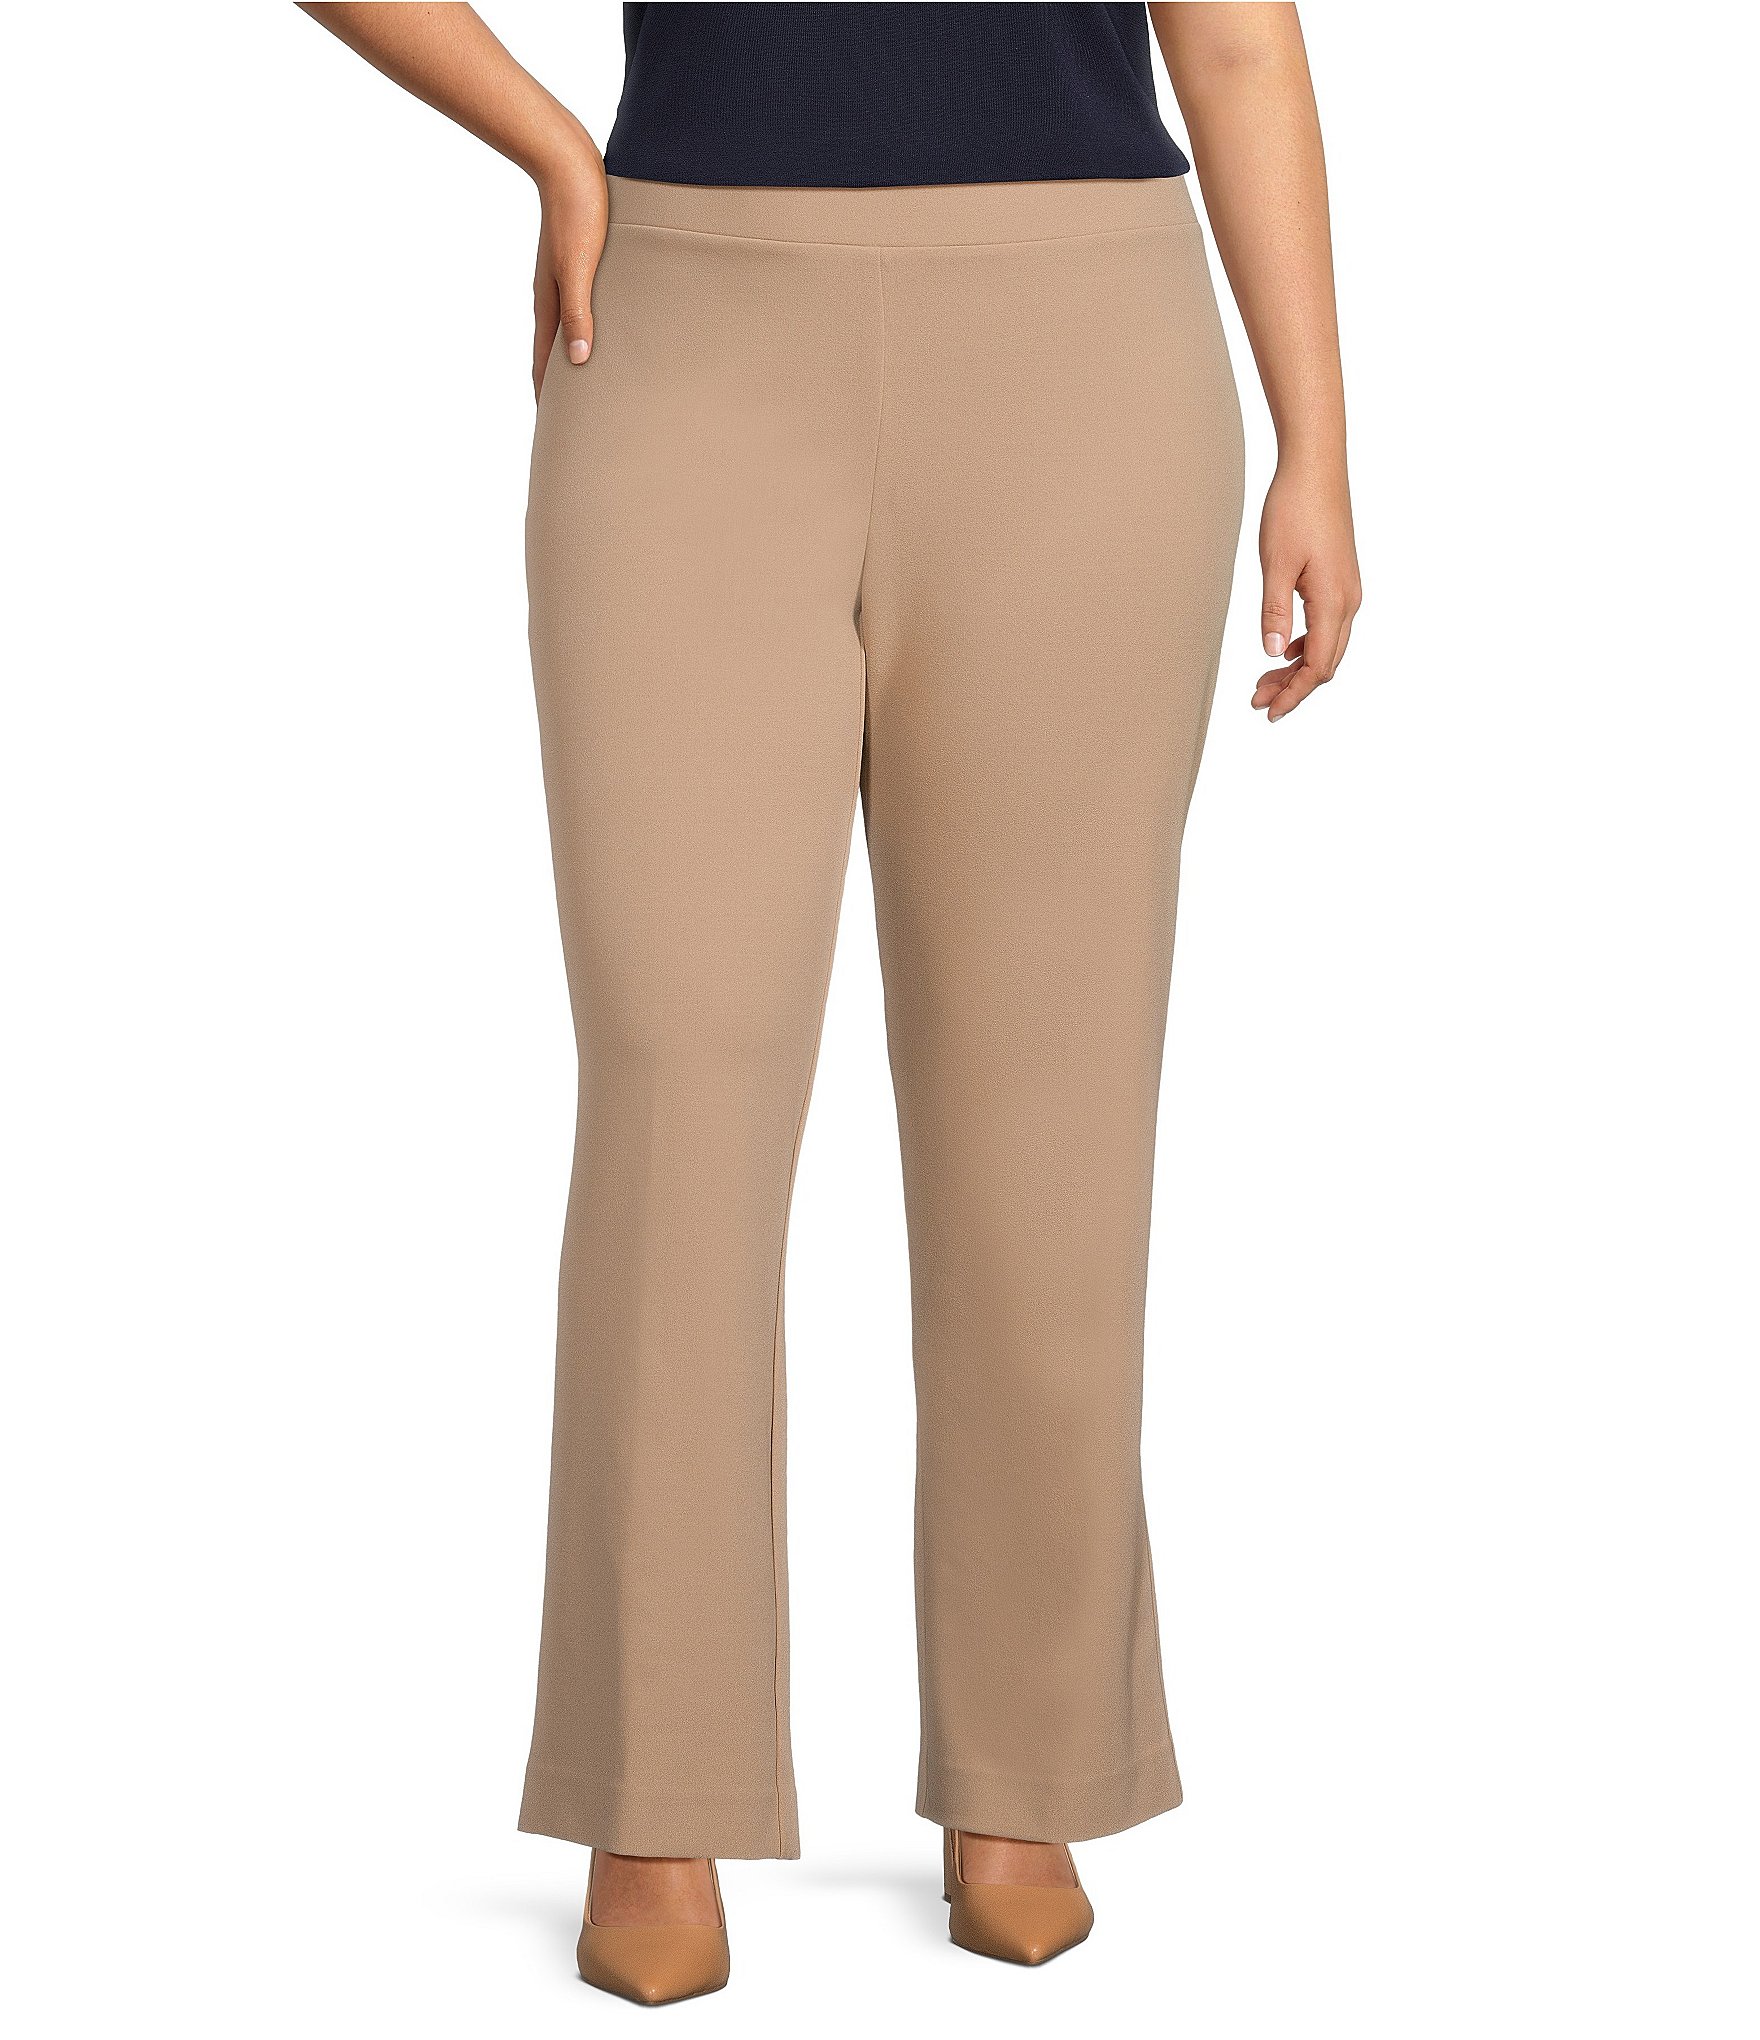 stretch pants: Plus-Size Suits and Workwear